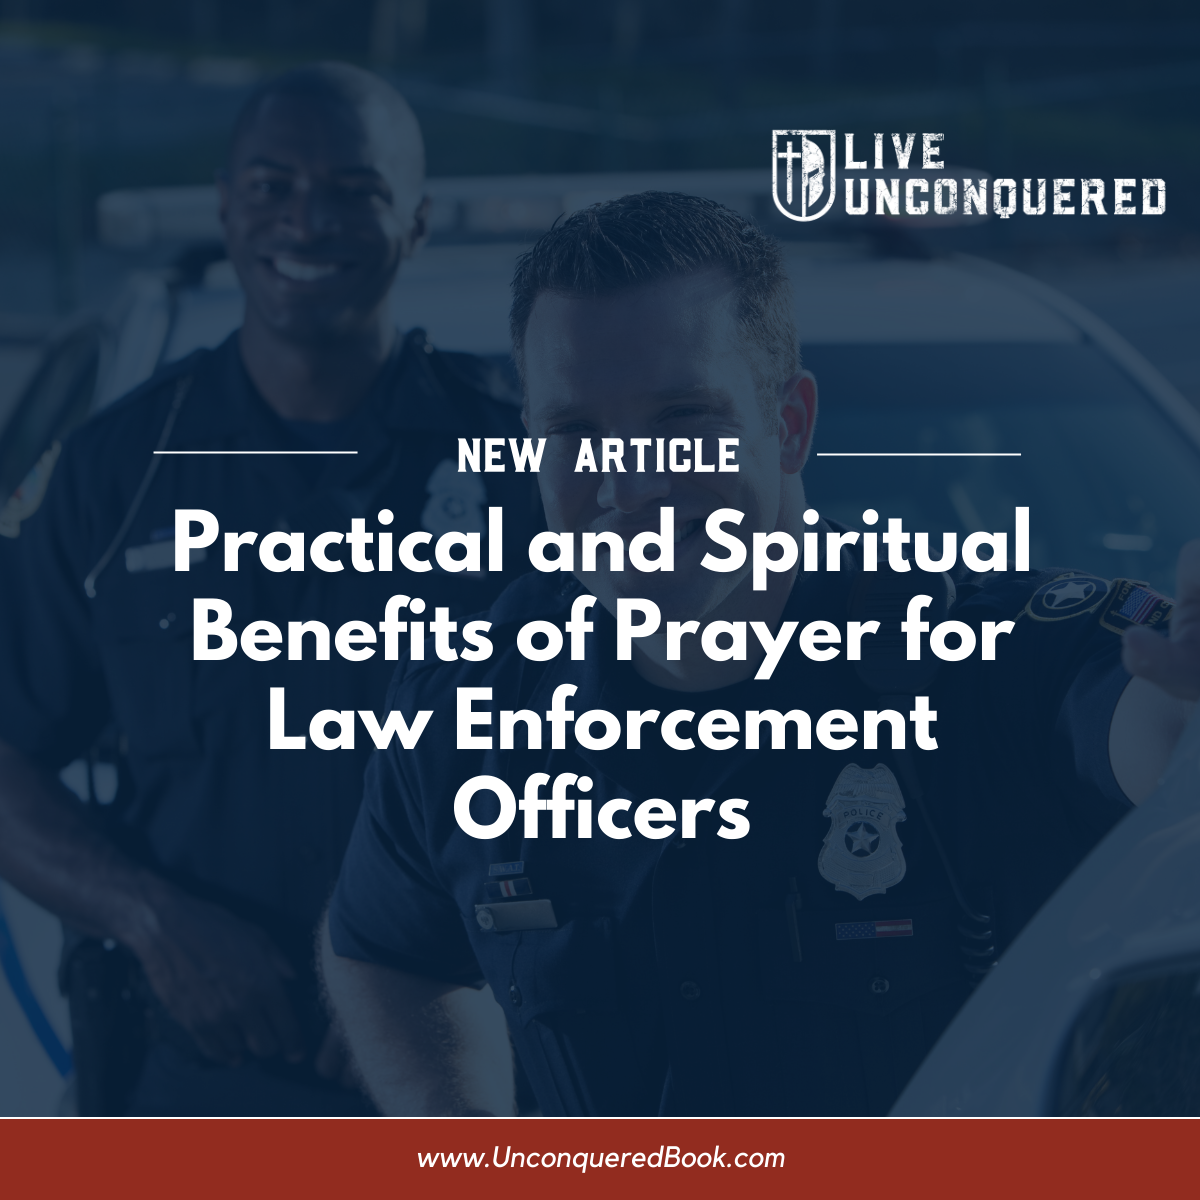 Practical and Spiritual Benefits of Prayer for Law Enforcement Officers